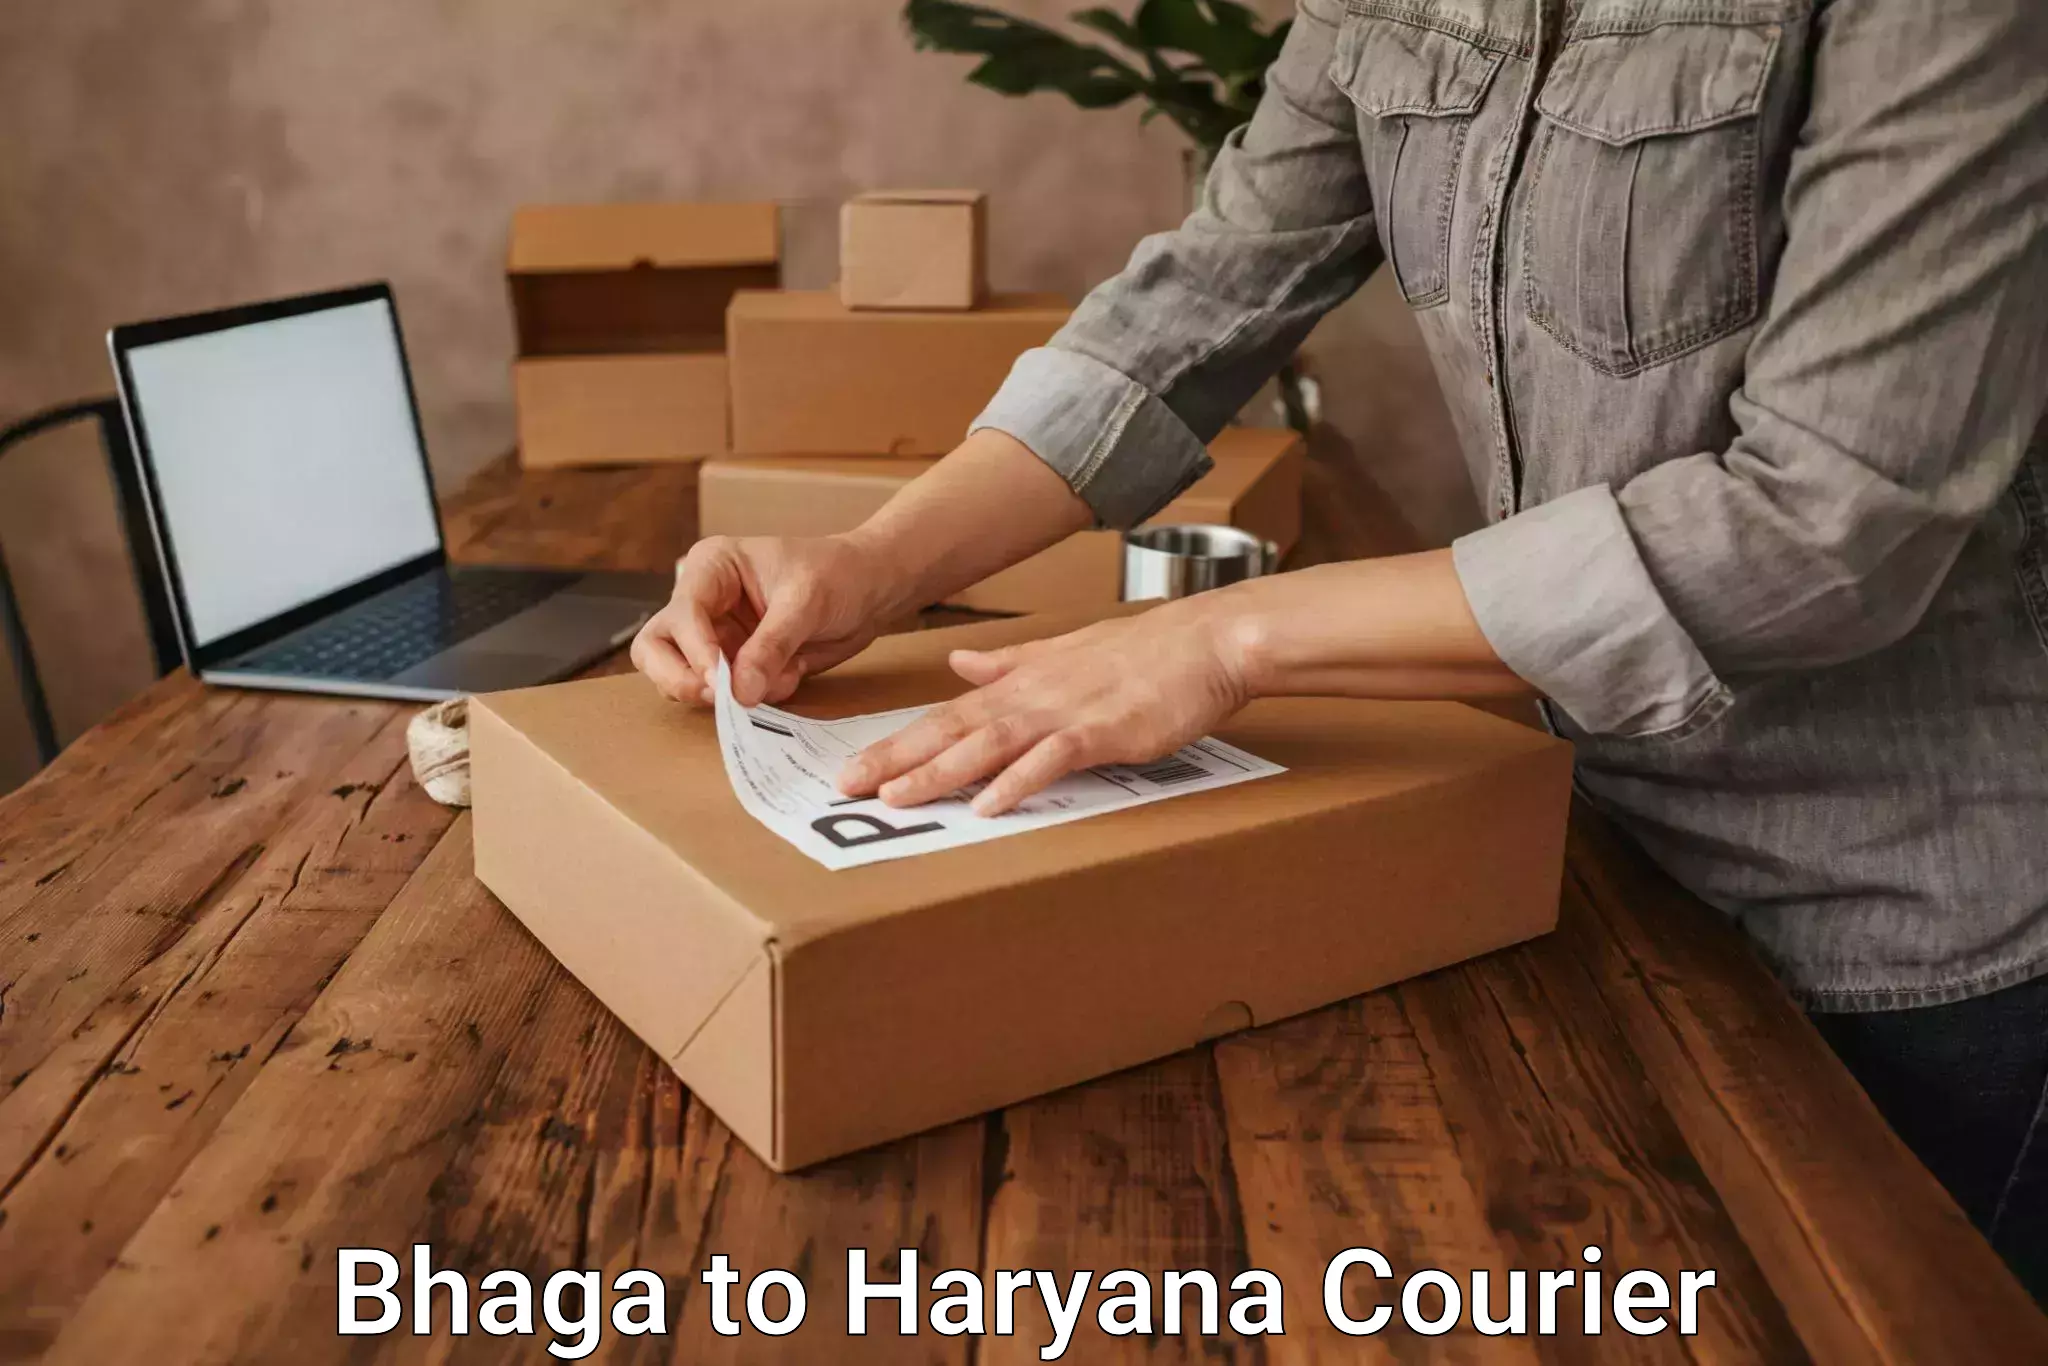 Customizable delivery plans Bhaga to Gurgaon